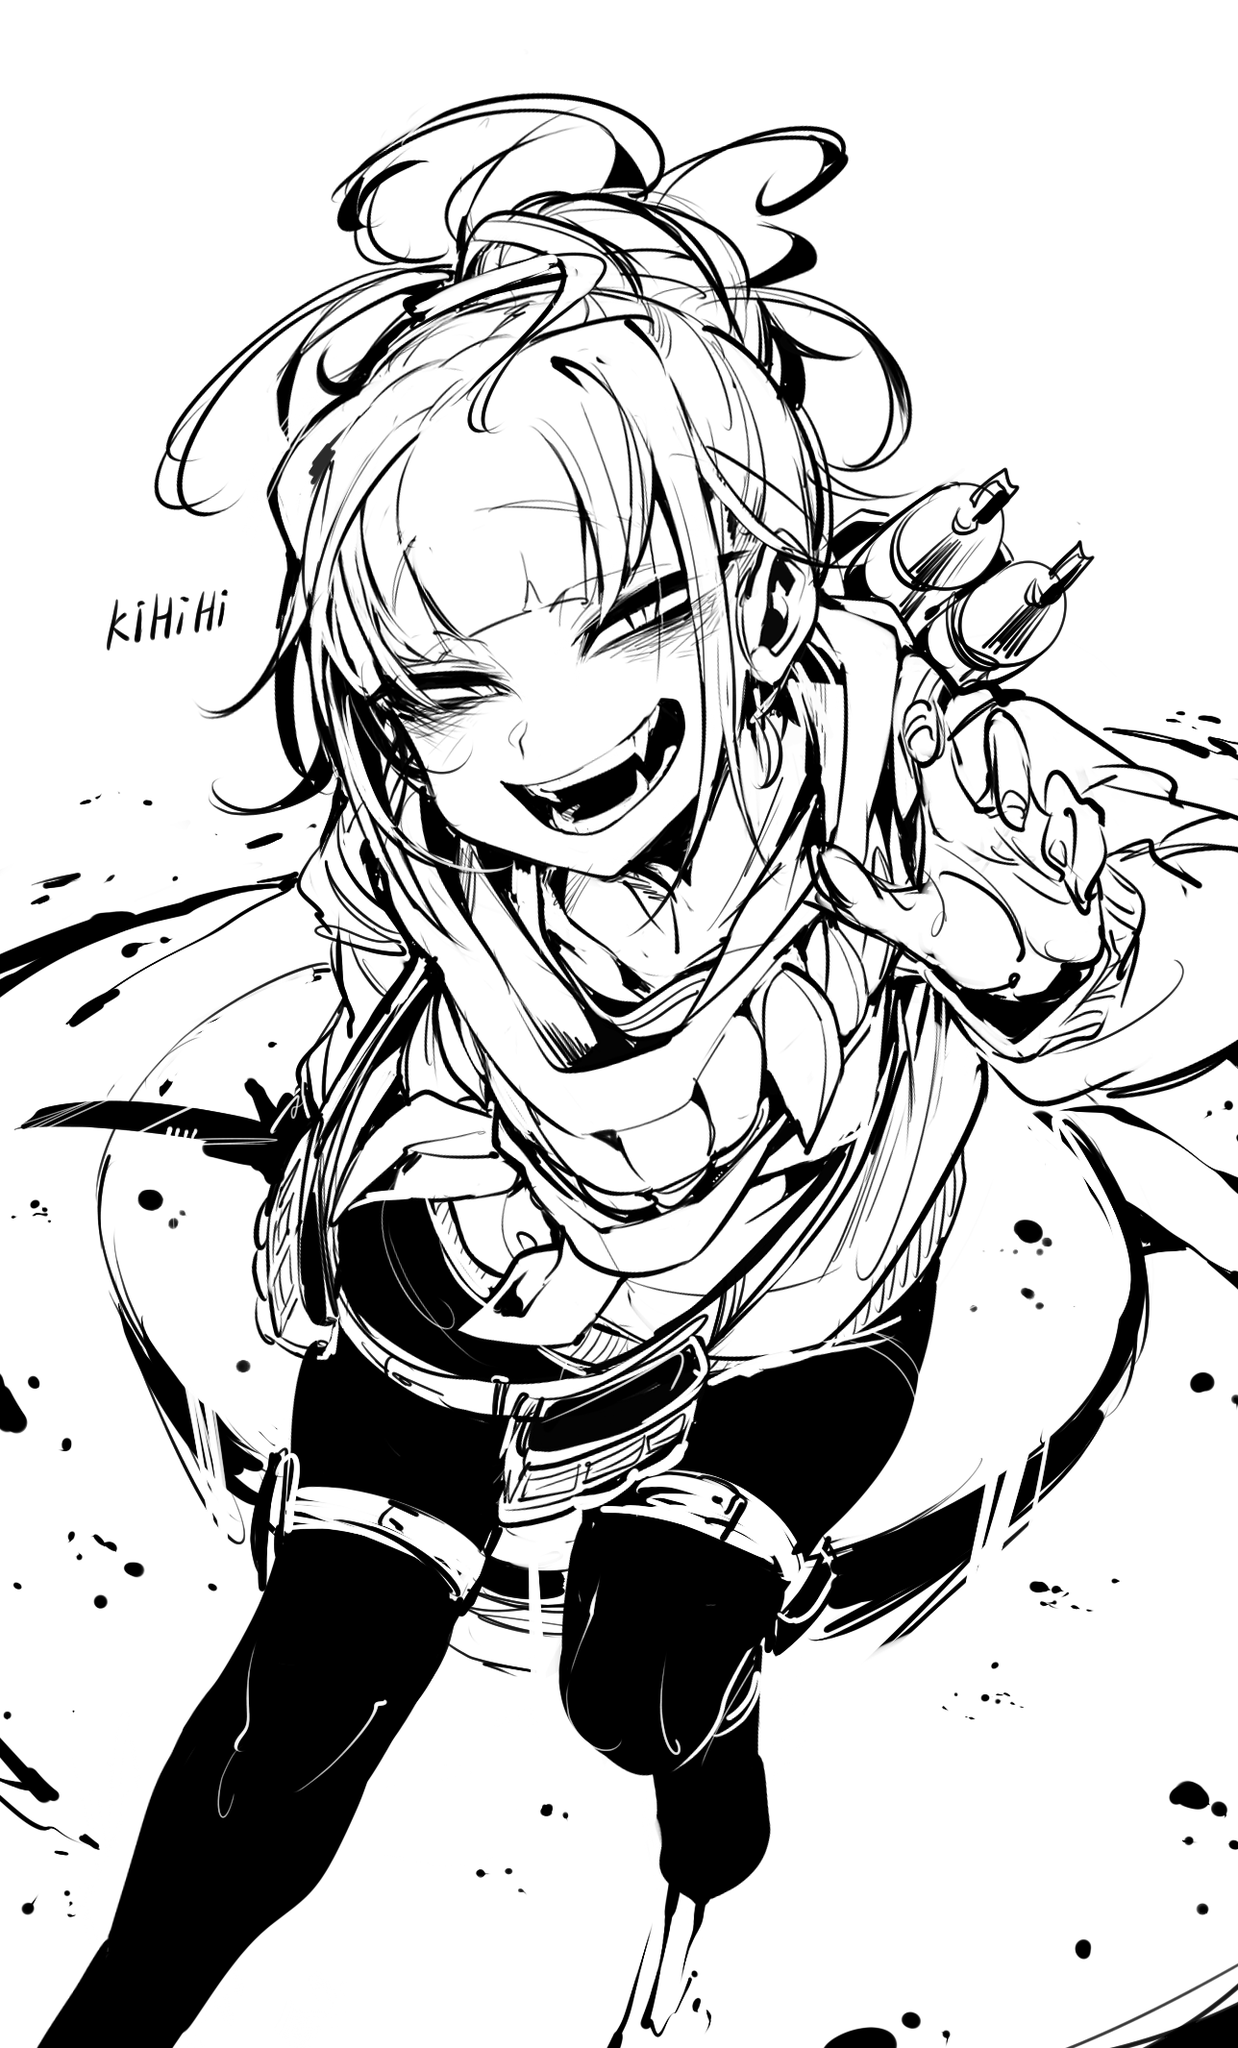 Himiko Toga by Rule 63 - pikabu.monster